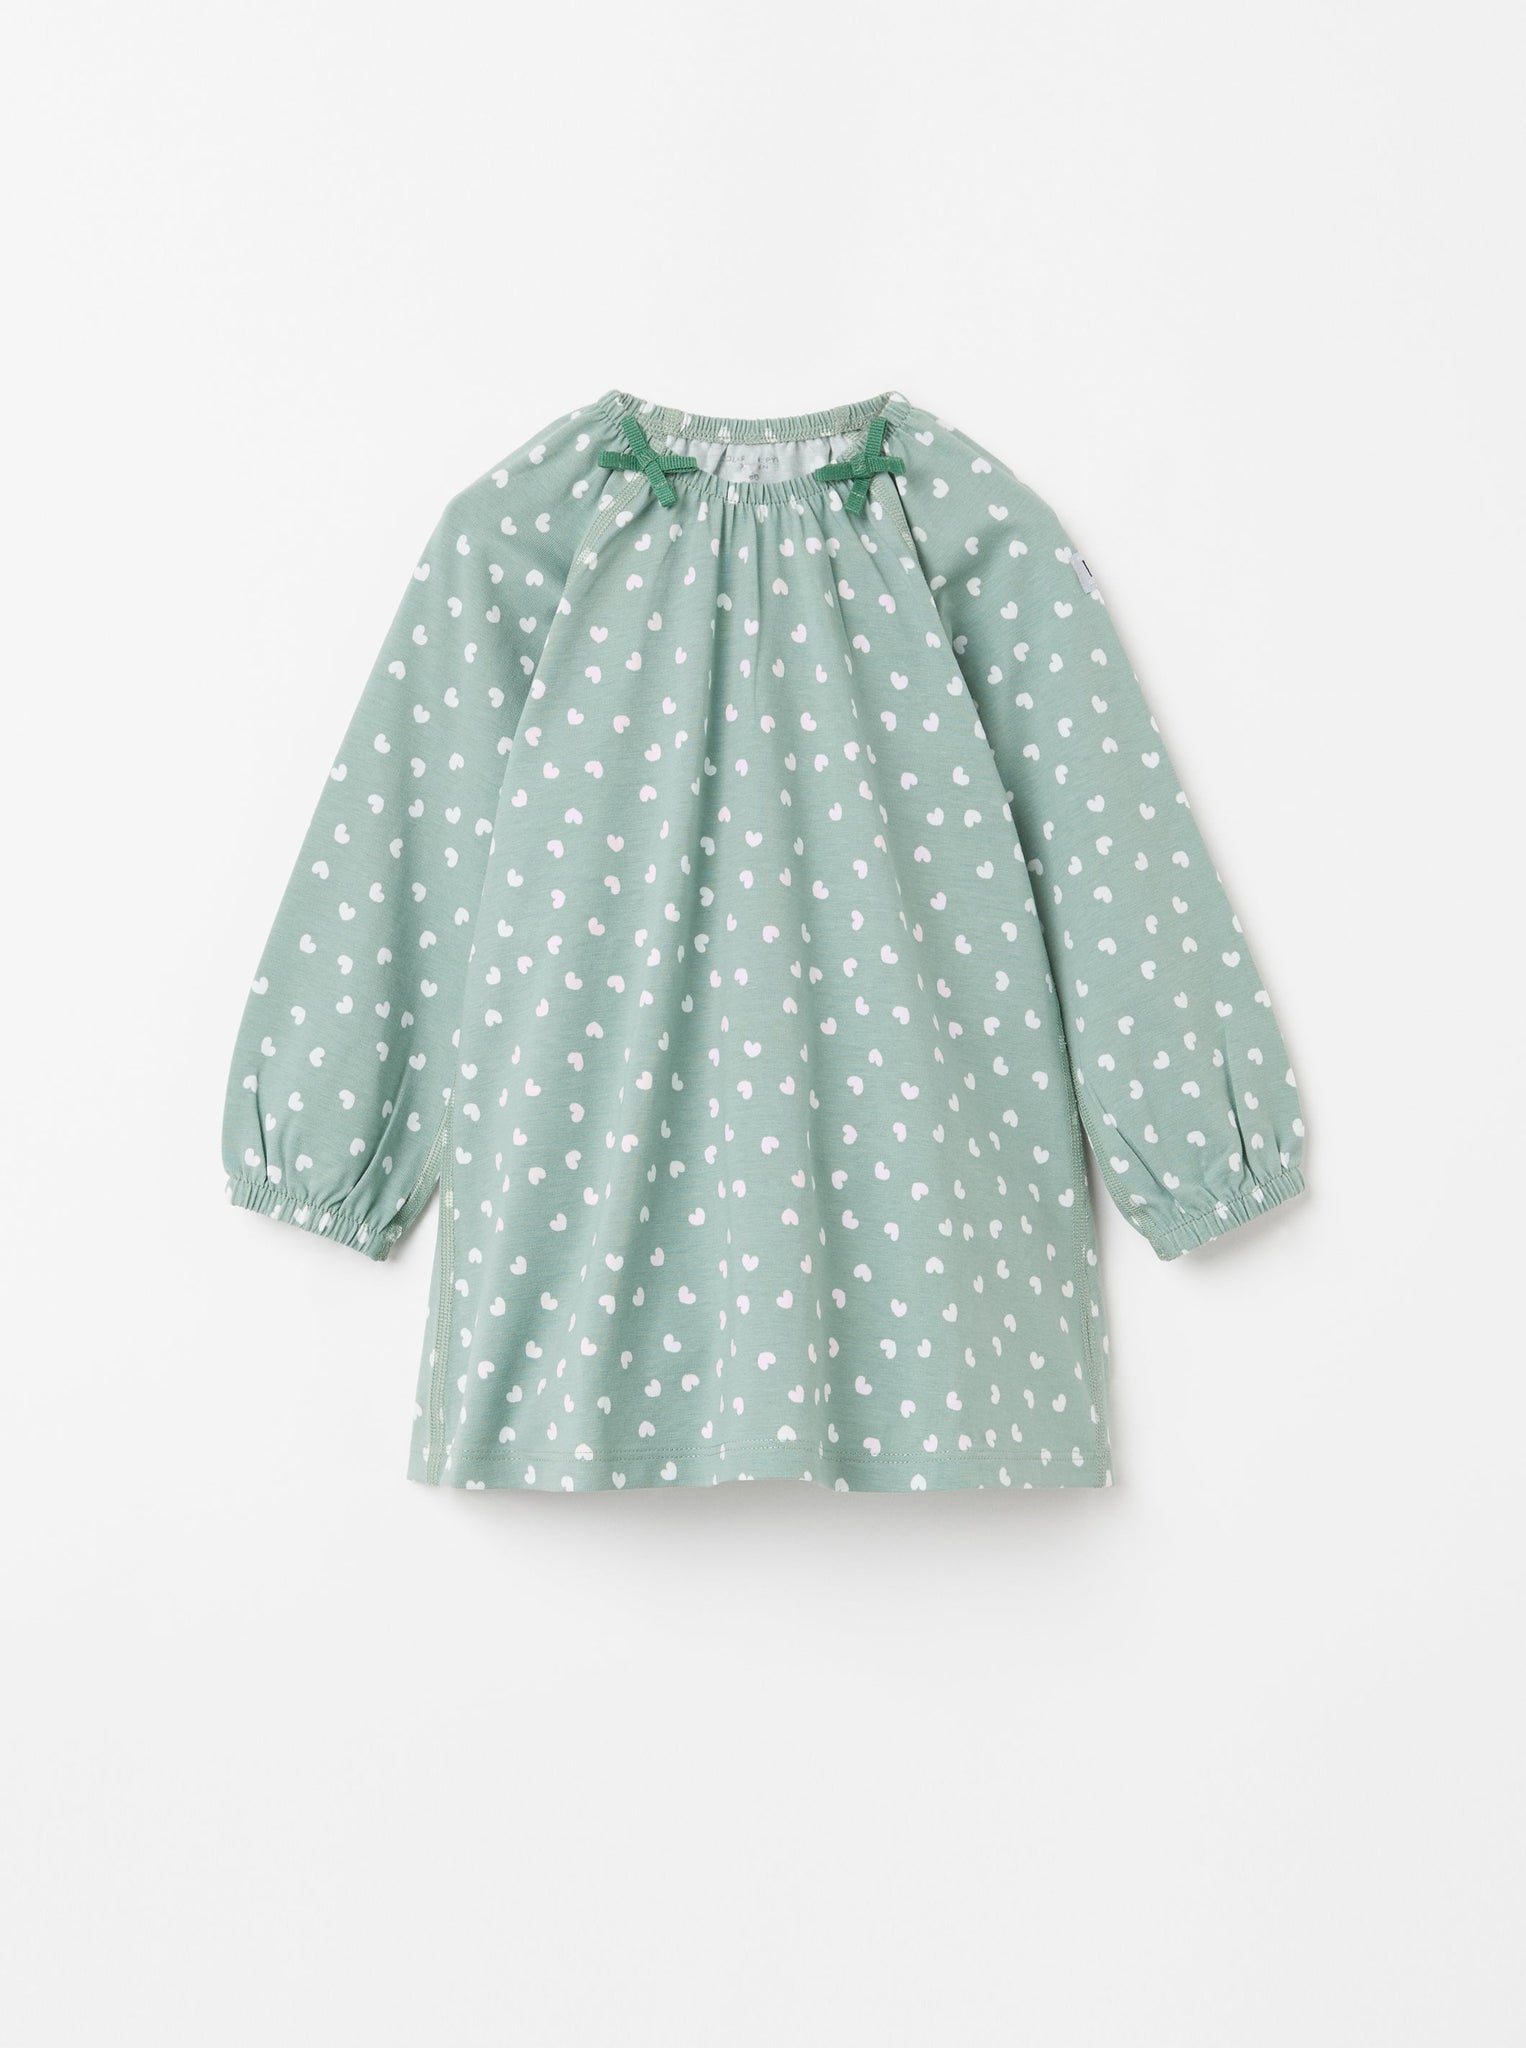 Heart Print Green Newborn Baby Dress from the Polarn O. Pyret Kidswear collection. Nordic kids clothes made from sustainable sources.